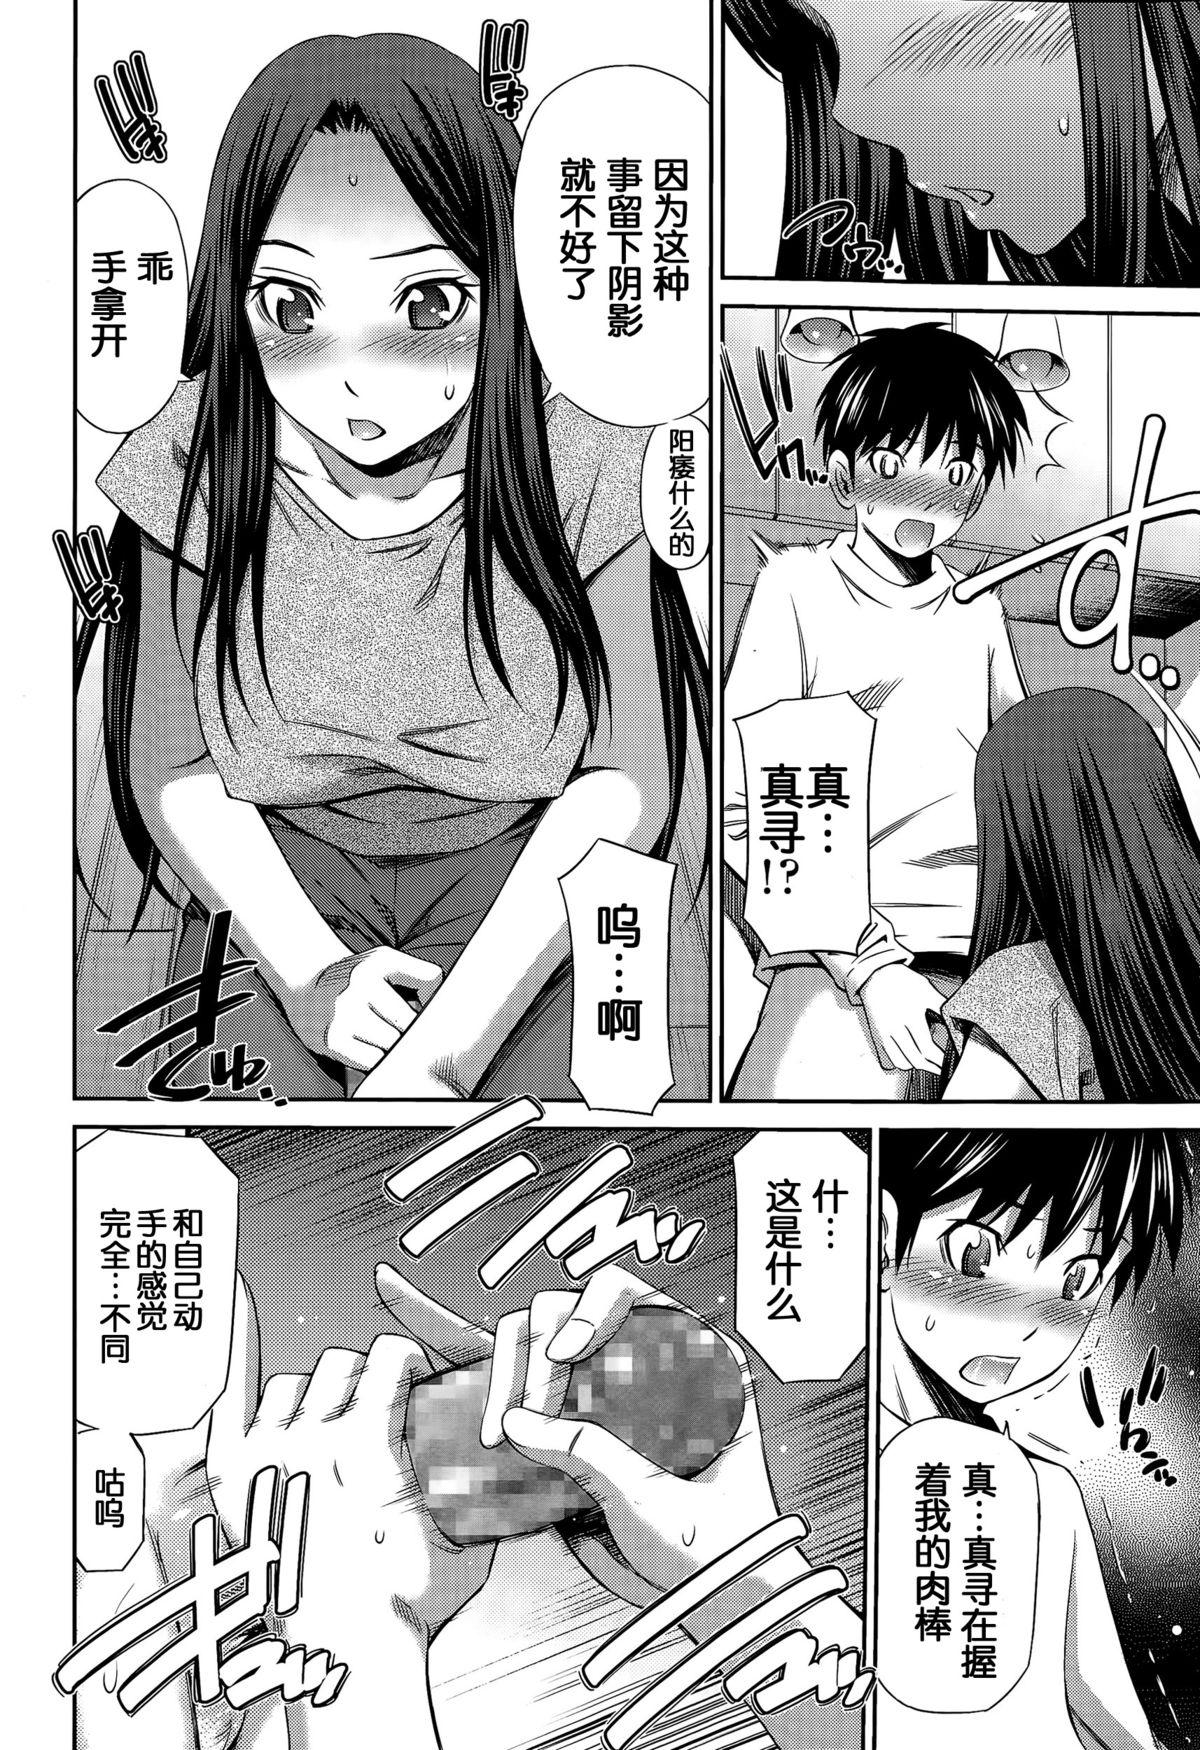 Butt Sex Onee-chan no Omocha Full - Page 7